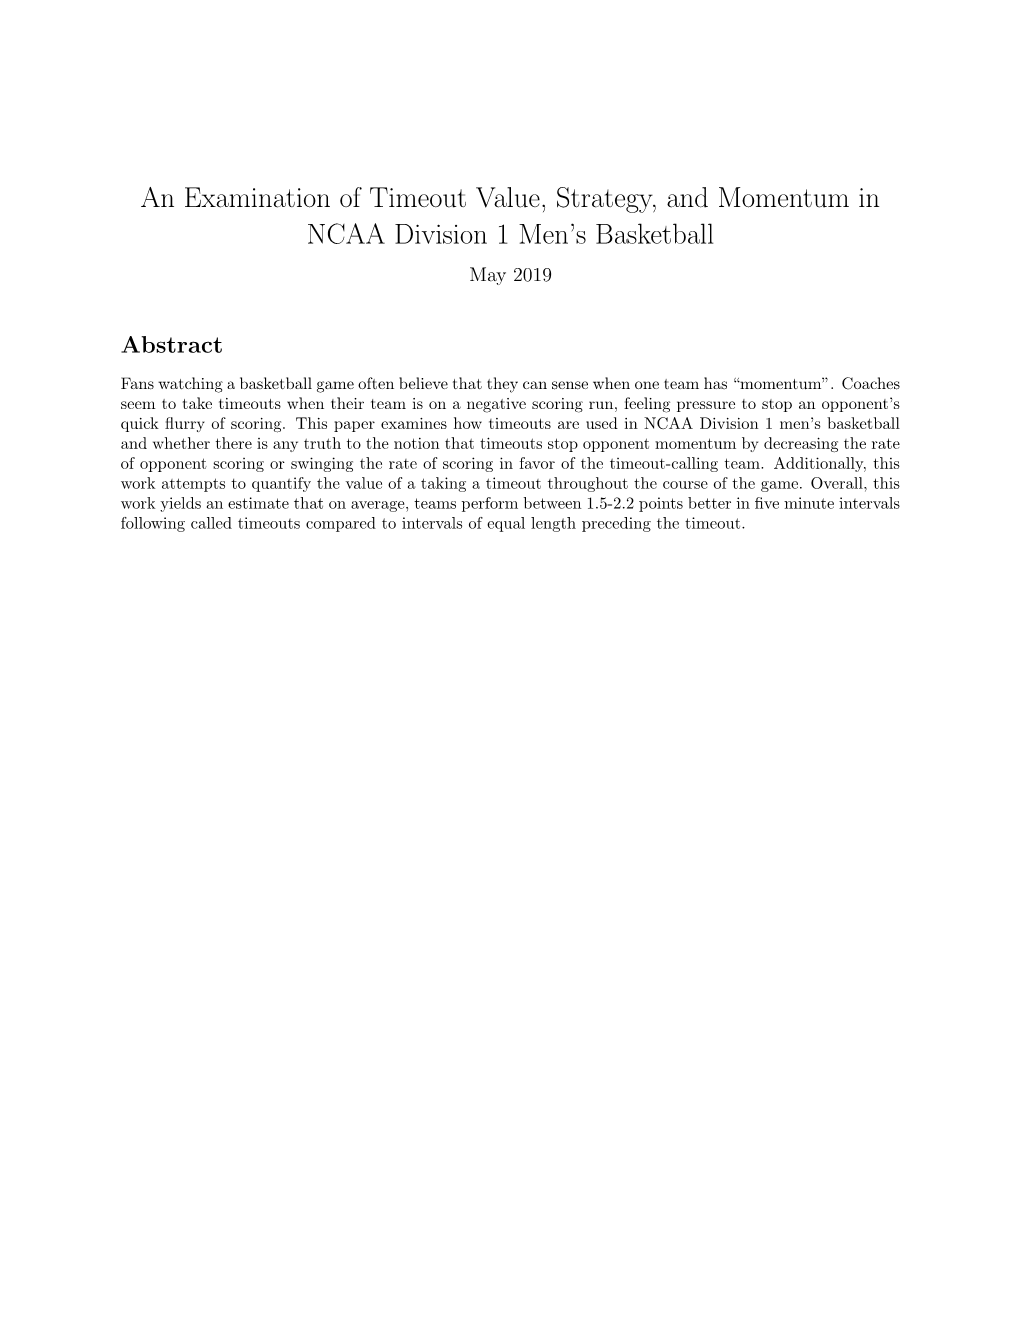 An Examination of Timeout Value, Strategy, and Momentum in NCAA Division 1 Men’S Basketball May 2019